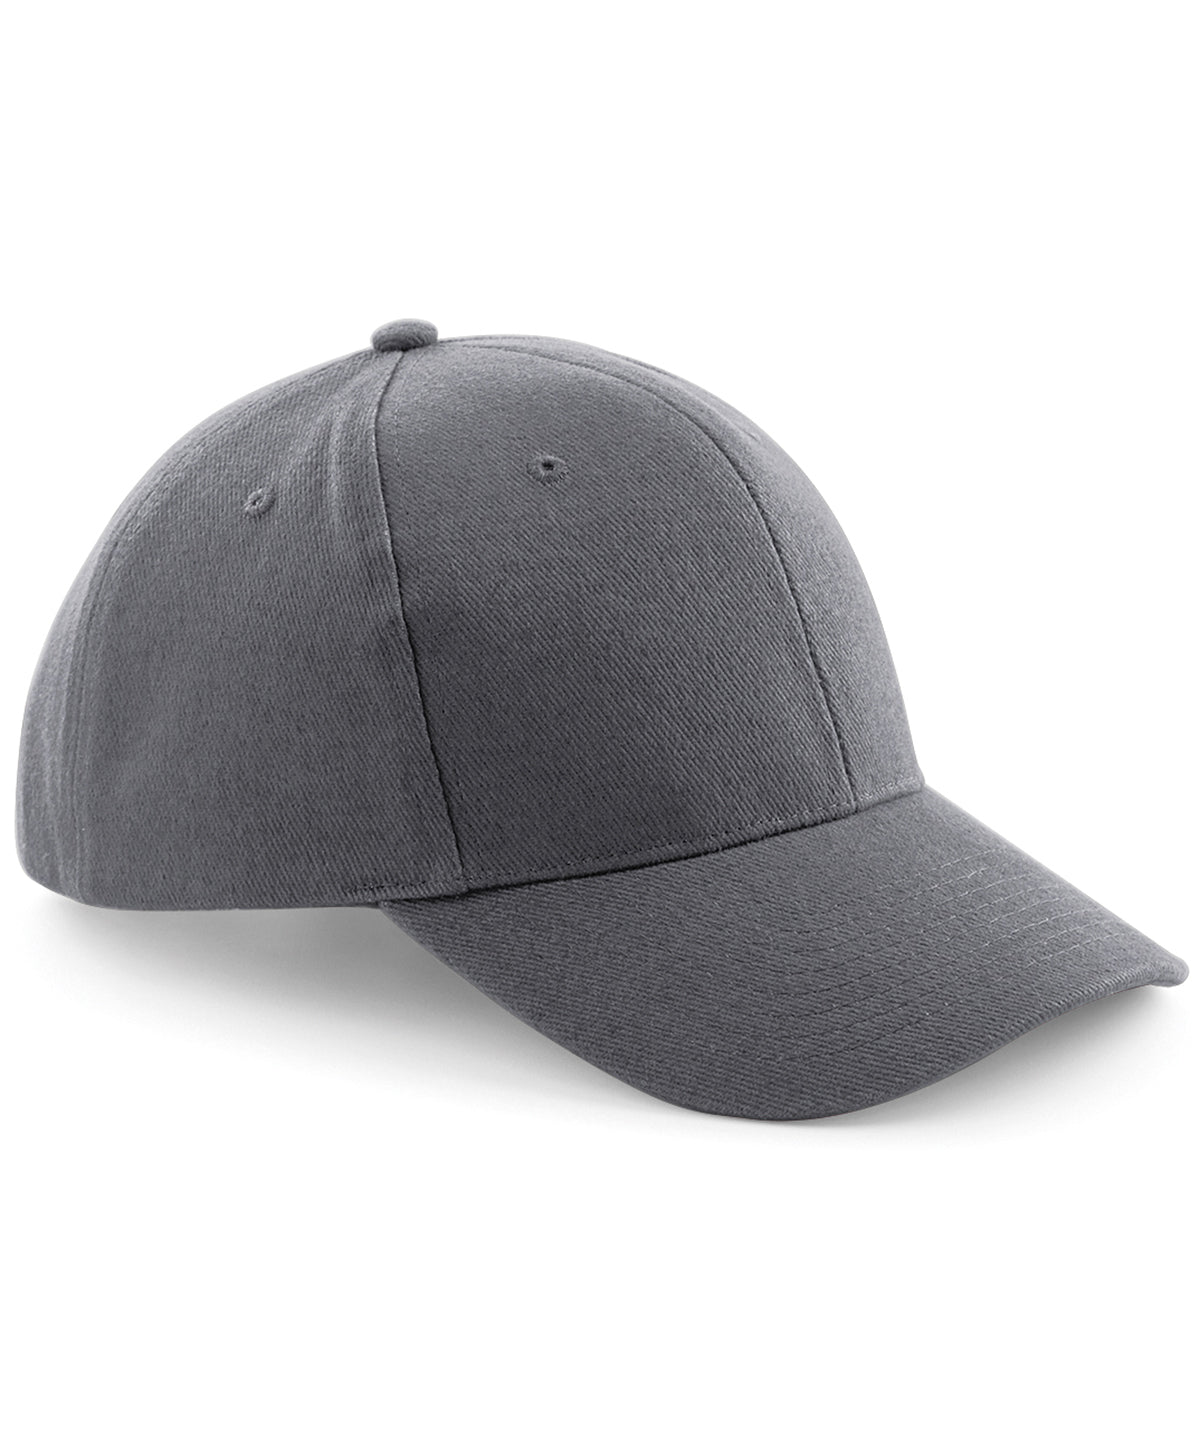 Personalised Caps - Mid Grey Beechfield Pro-style heavy brushed cotton cap